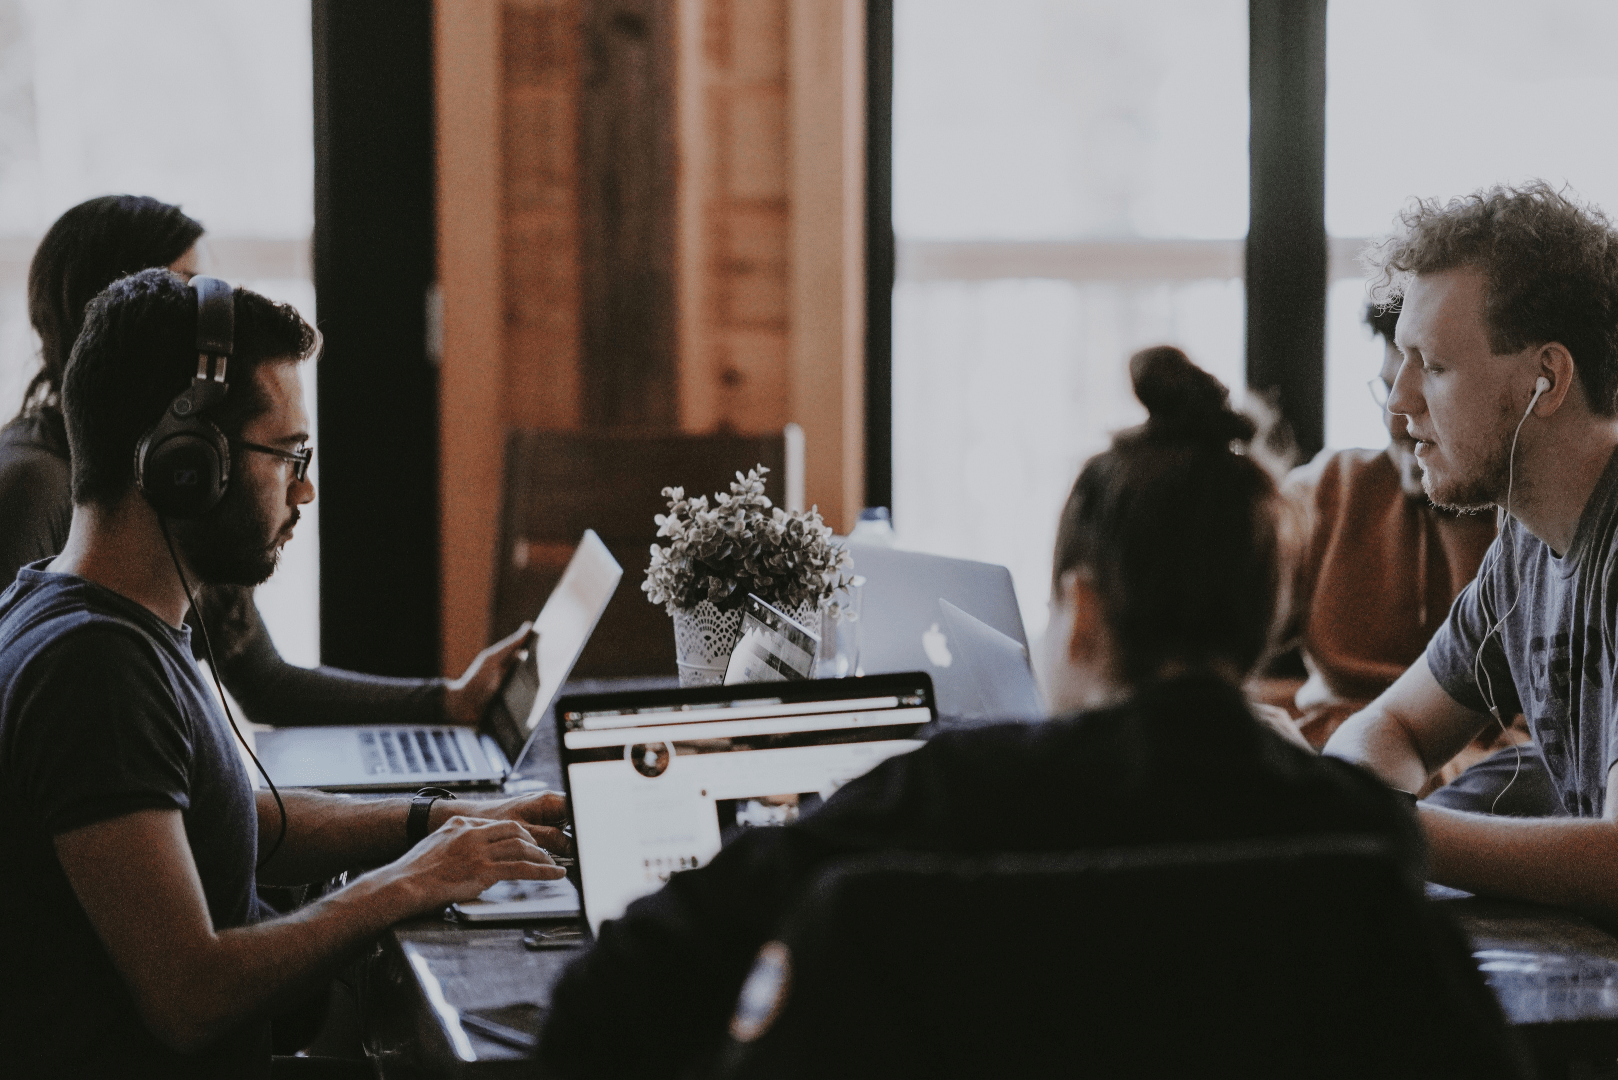 In this article, we'll explore how nearshore software development can help startups grow and scale while keeping costs low.